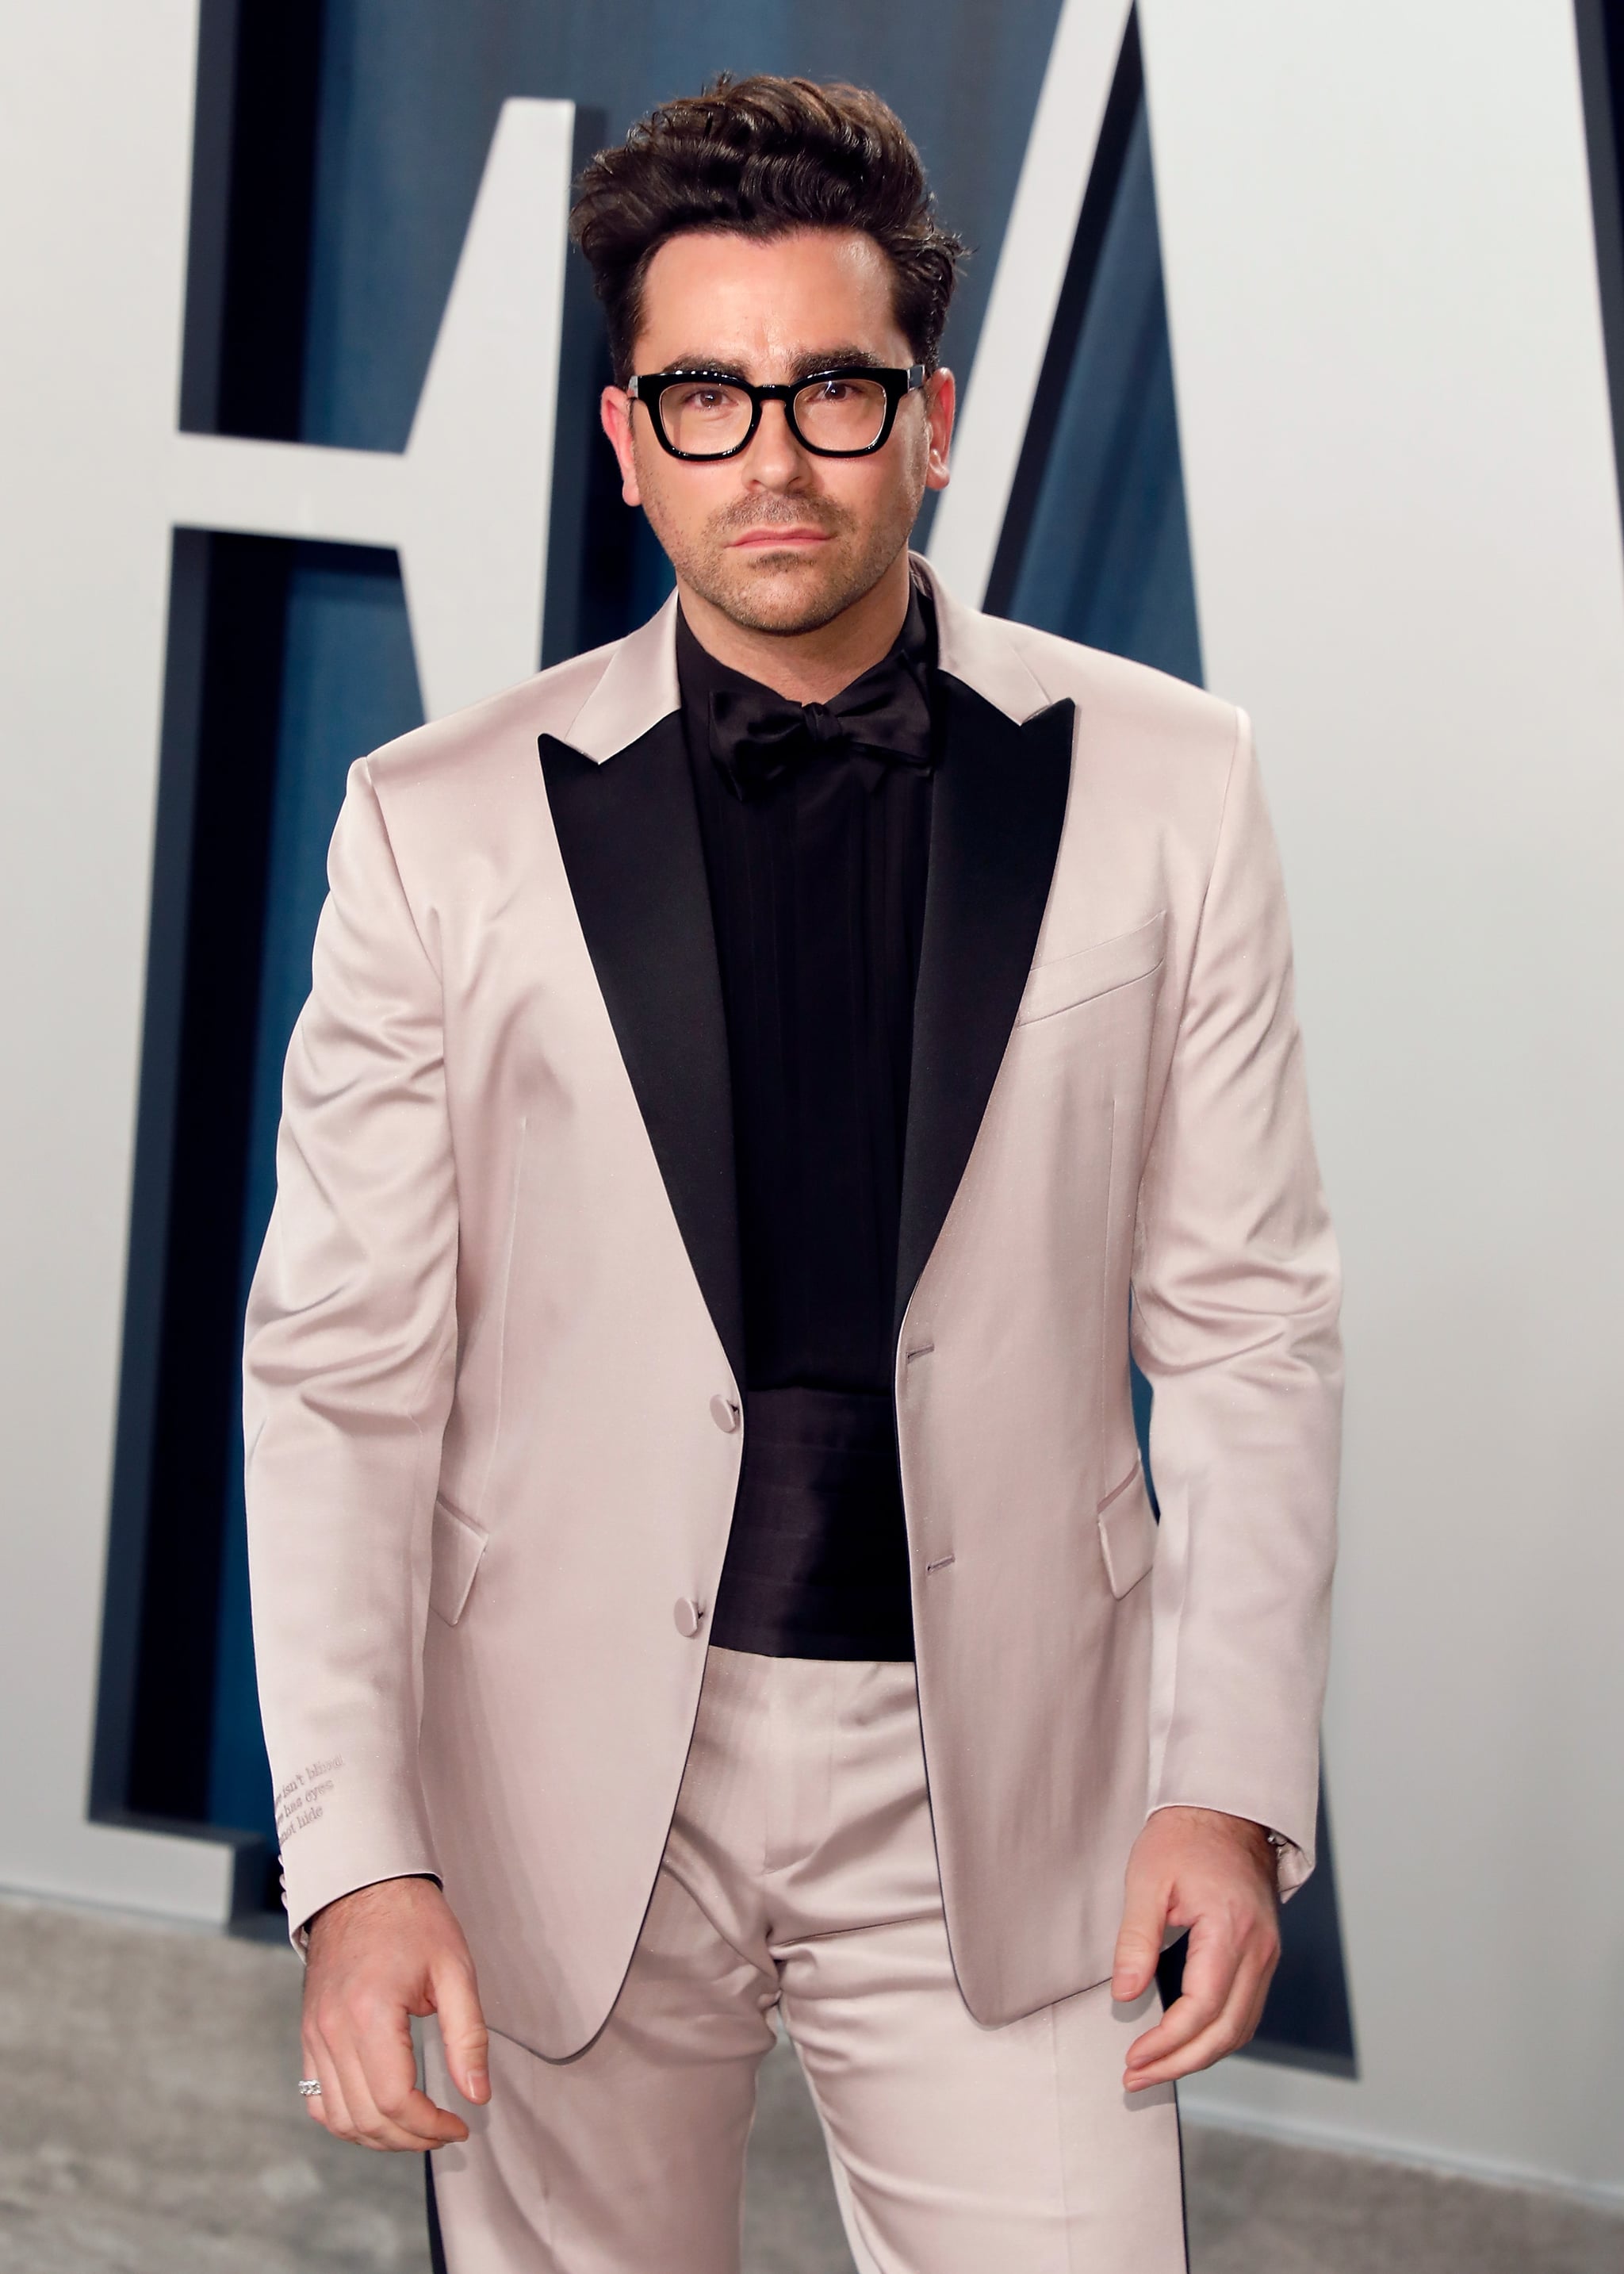 BEVERLY HILLS, CALIFORNIA - FEBRUARY 09:  Dan Levy attends the 2020 Vanity Fair Oscar Party at Wallis Annenberg Centre for the Performing Arts on February 09, 2020 in Beverly Hills, California. (Photo by Taylor Hill/FilmMagic,)